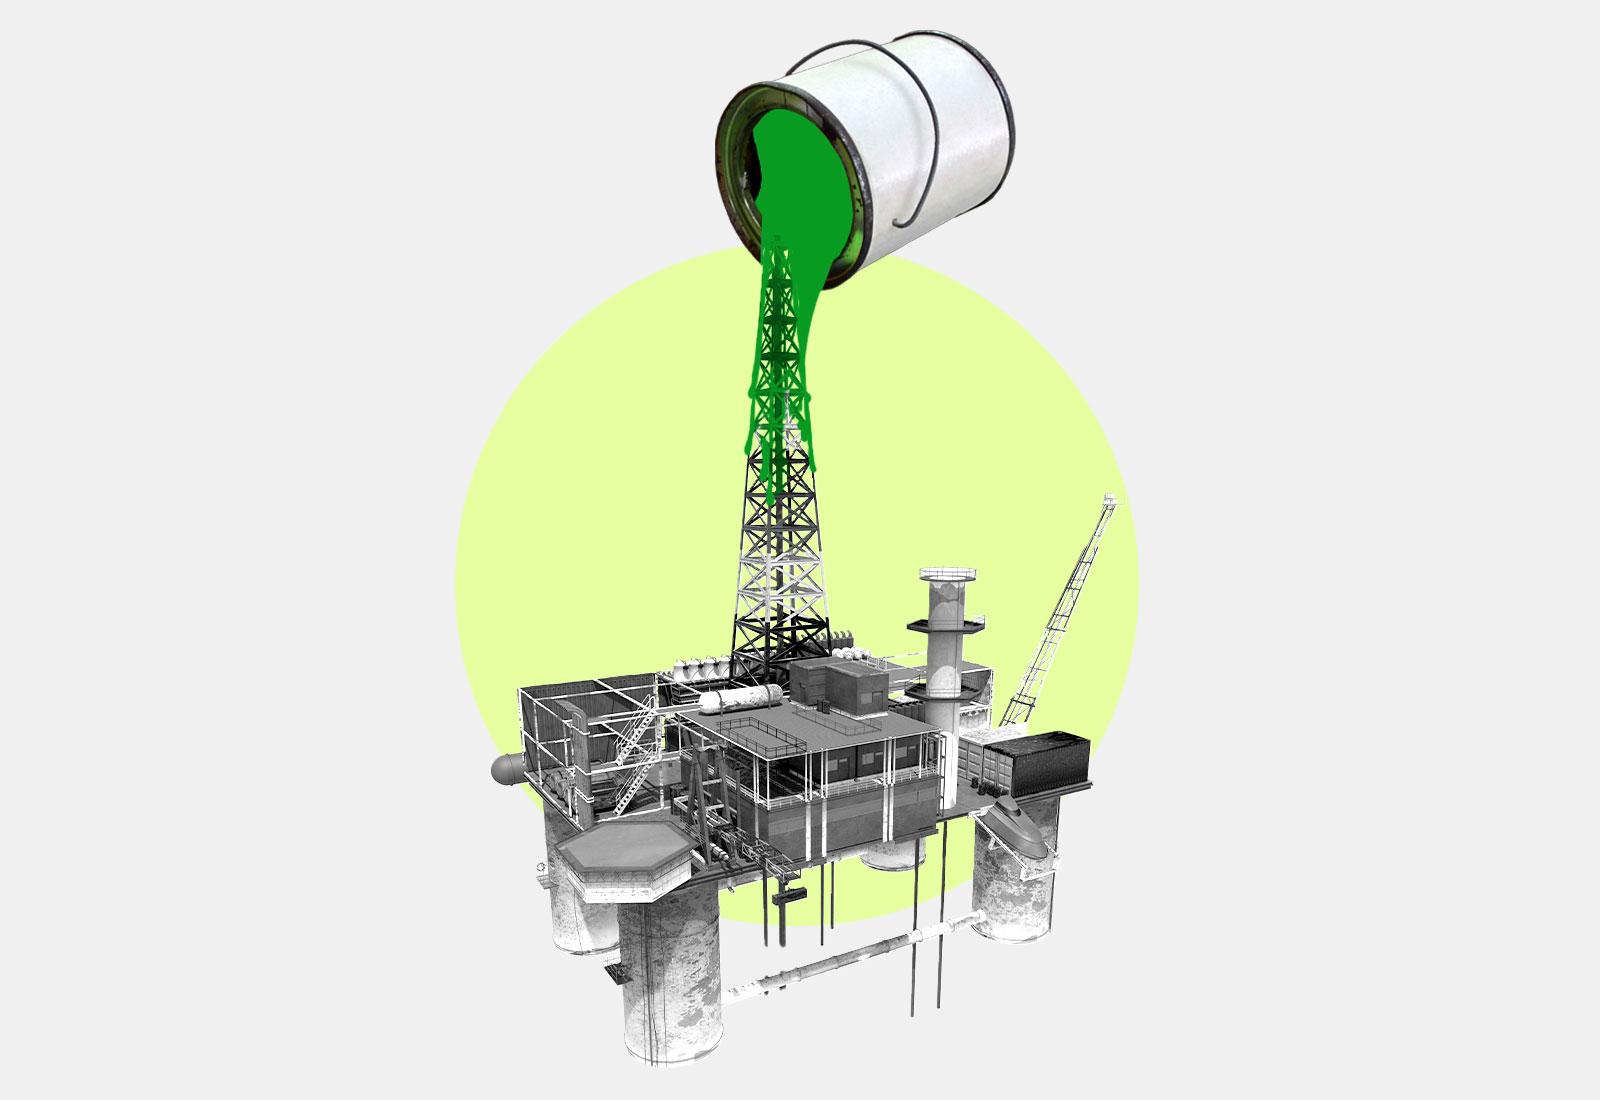 collage: paint bucket pouring green paint on top of black and white oil rig with green circle in background